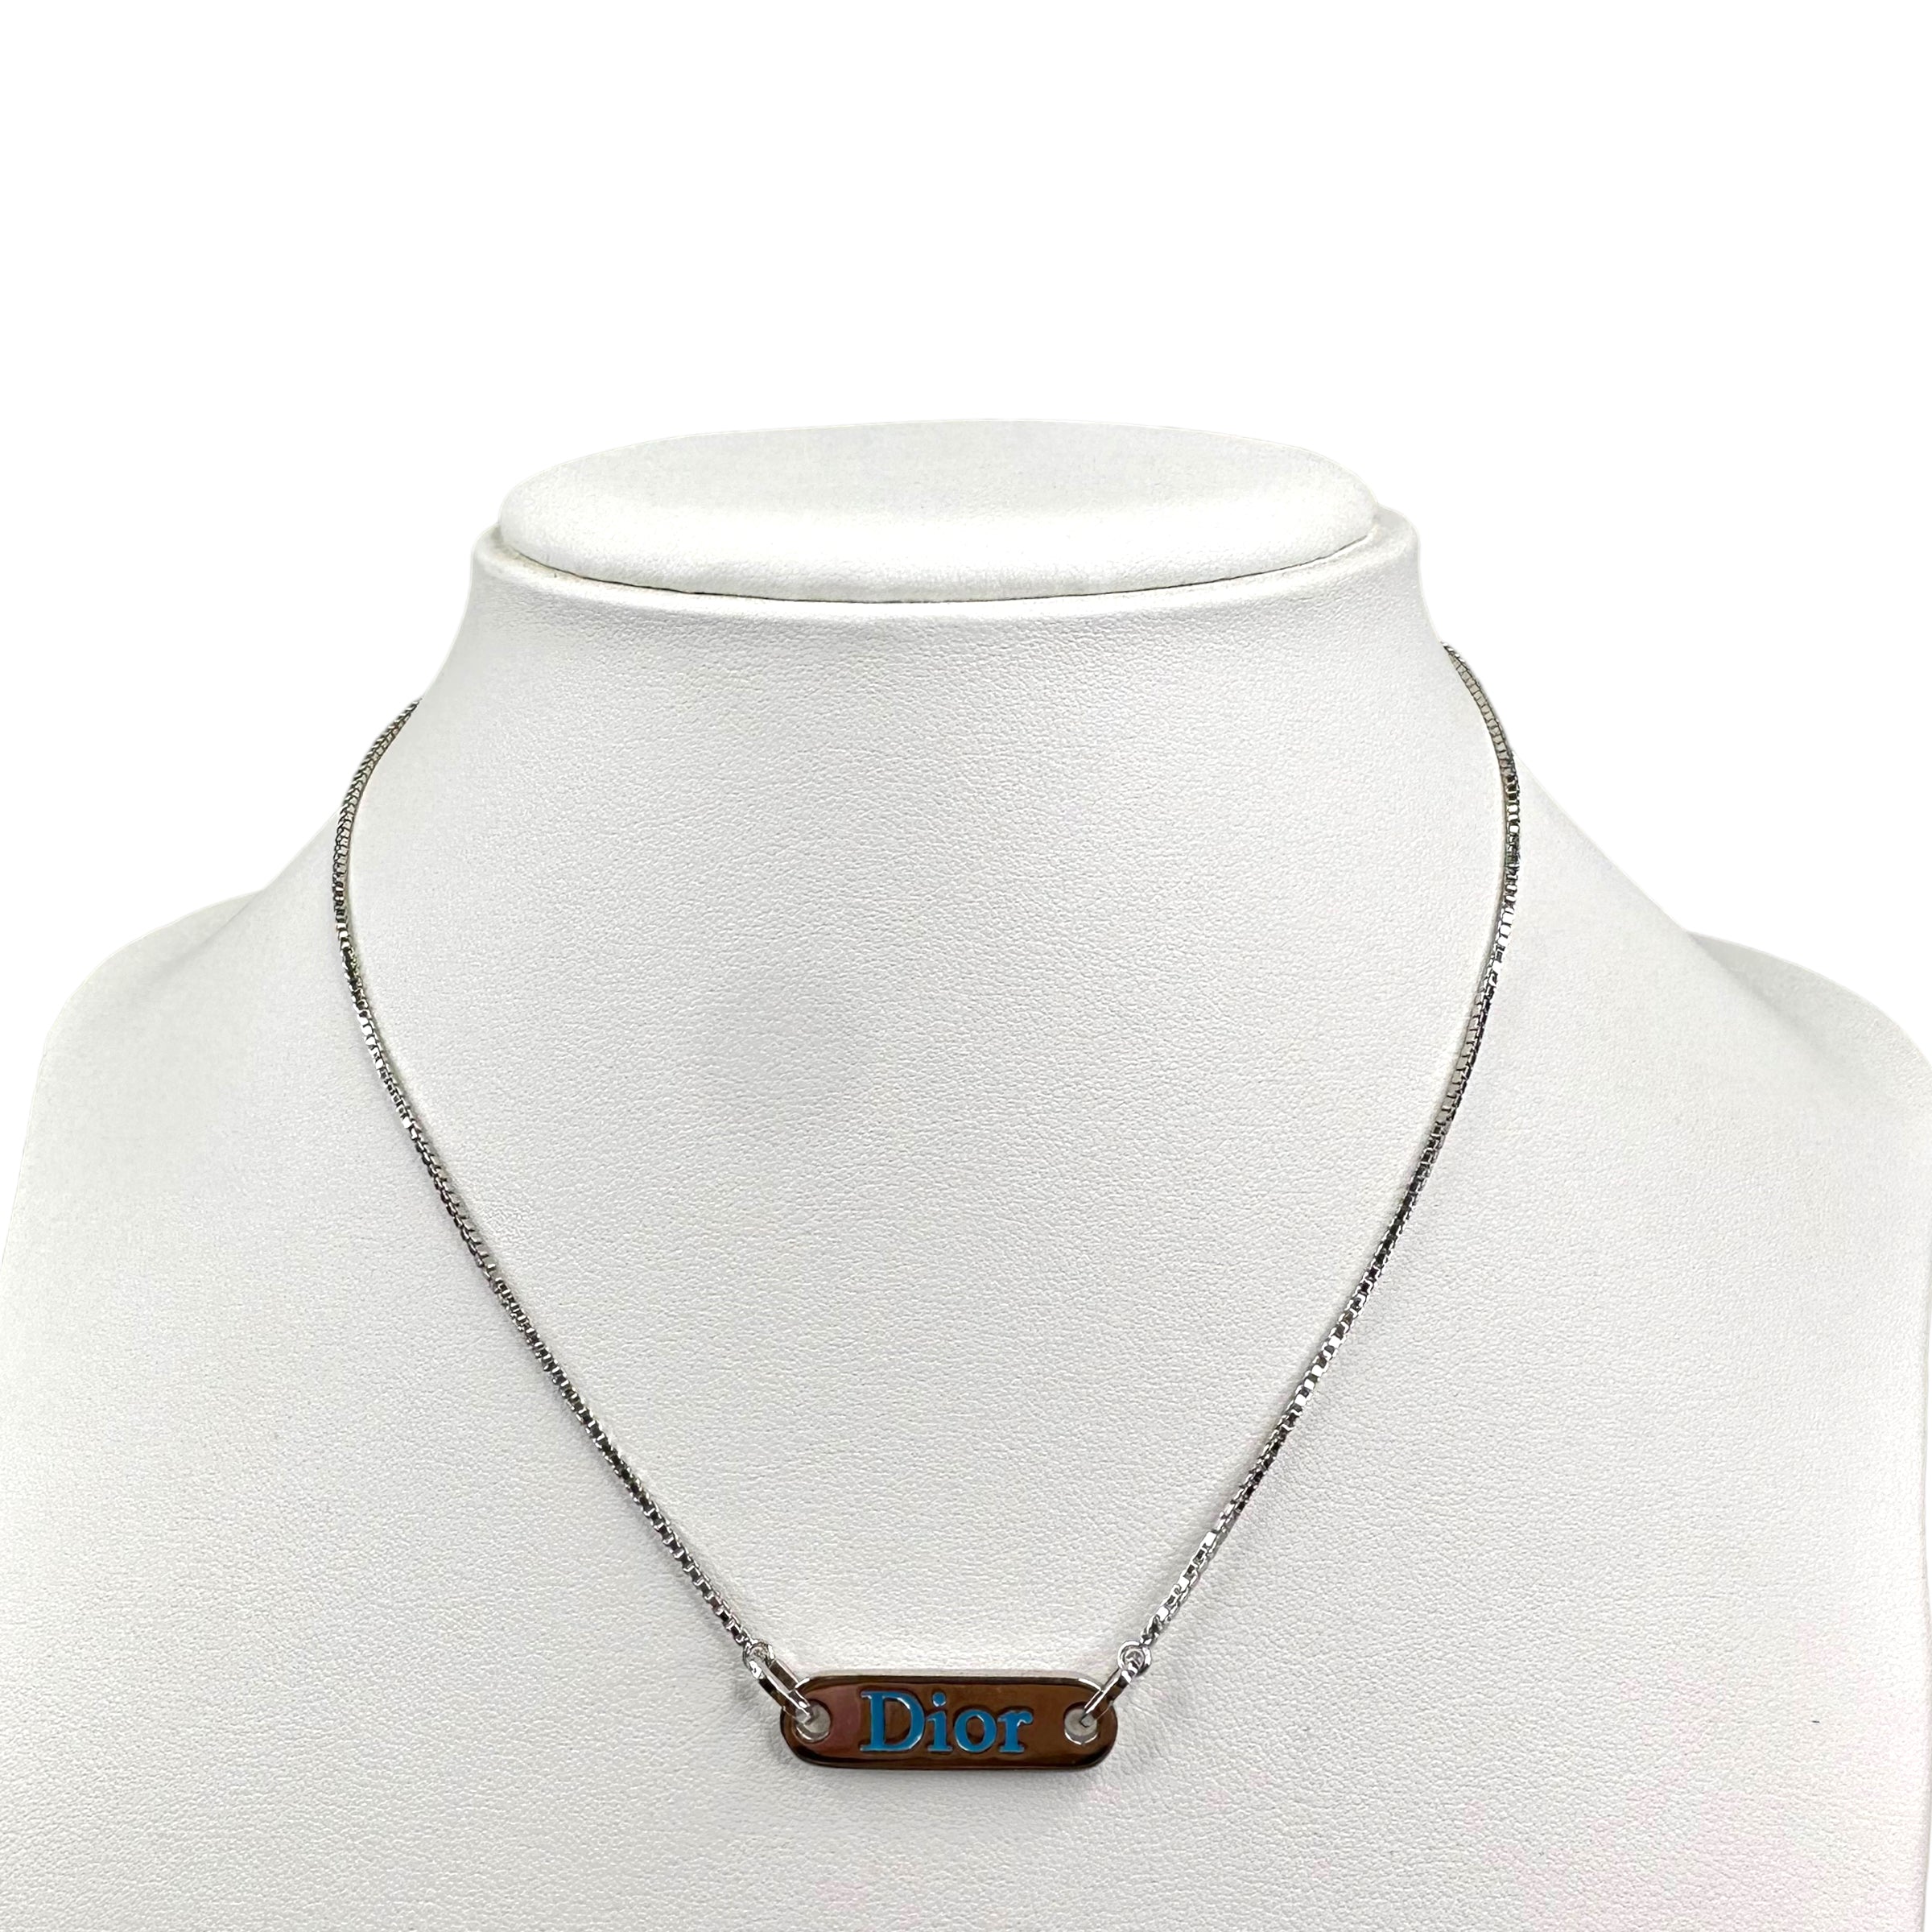 DIOR DEBOSSED PLATE BLUE SPELLOUT NECKLACE SILVER-PLATED